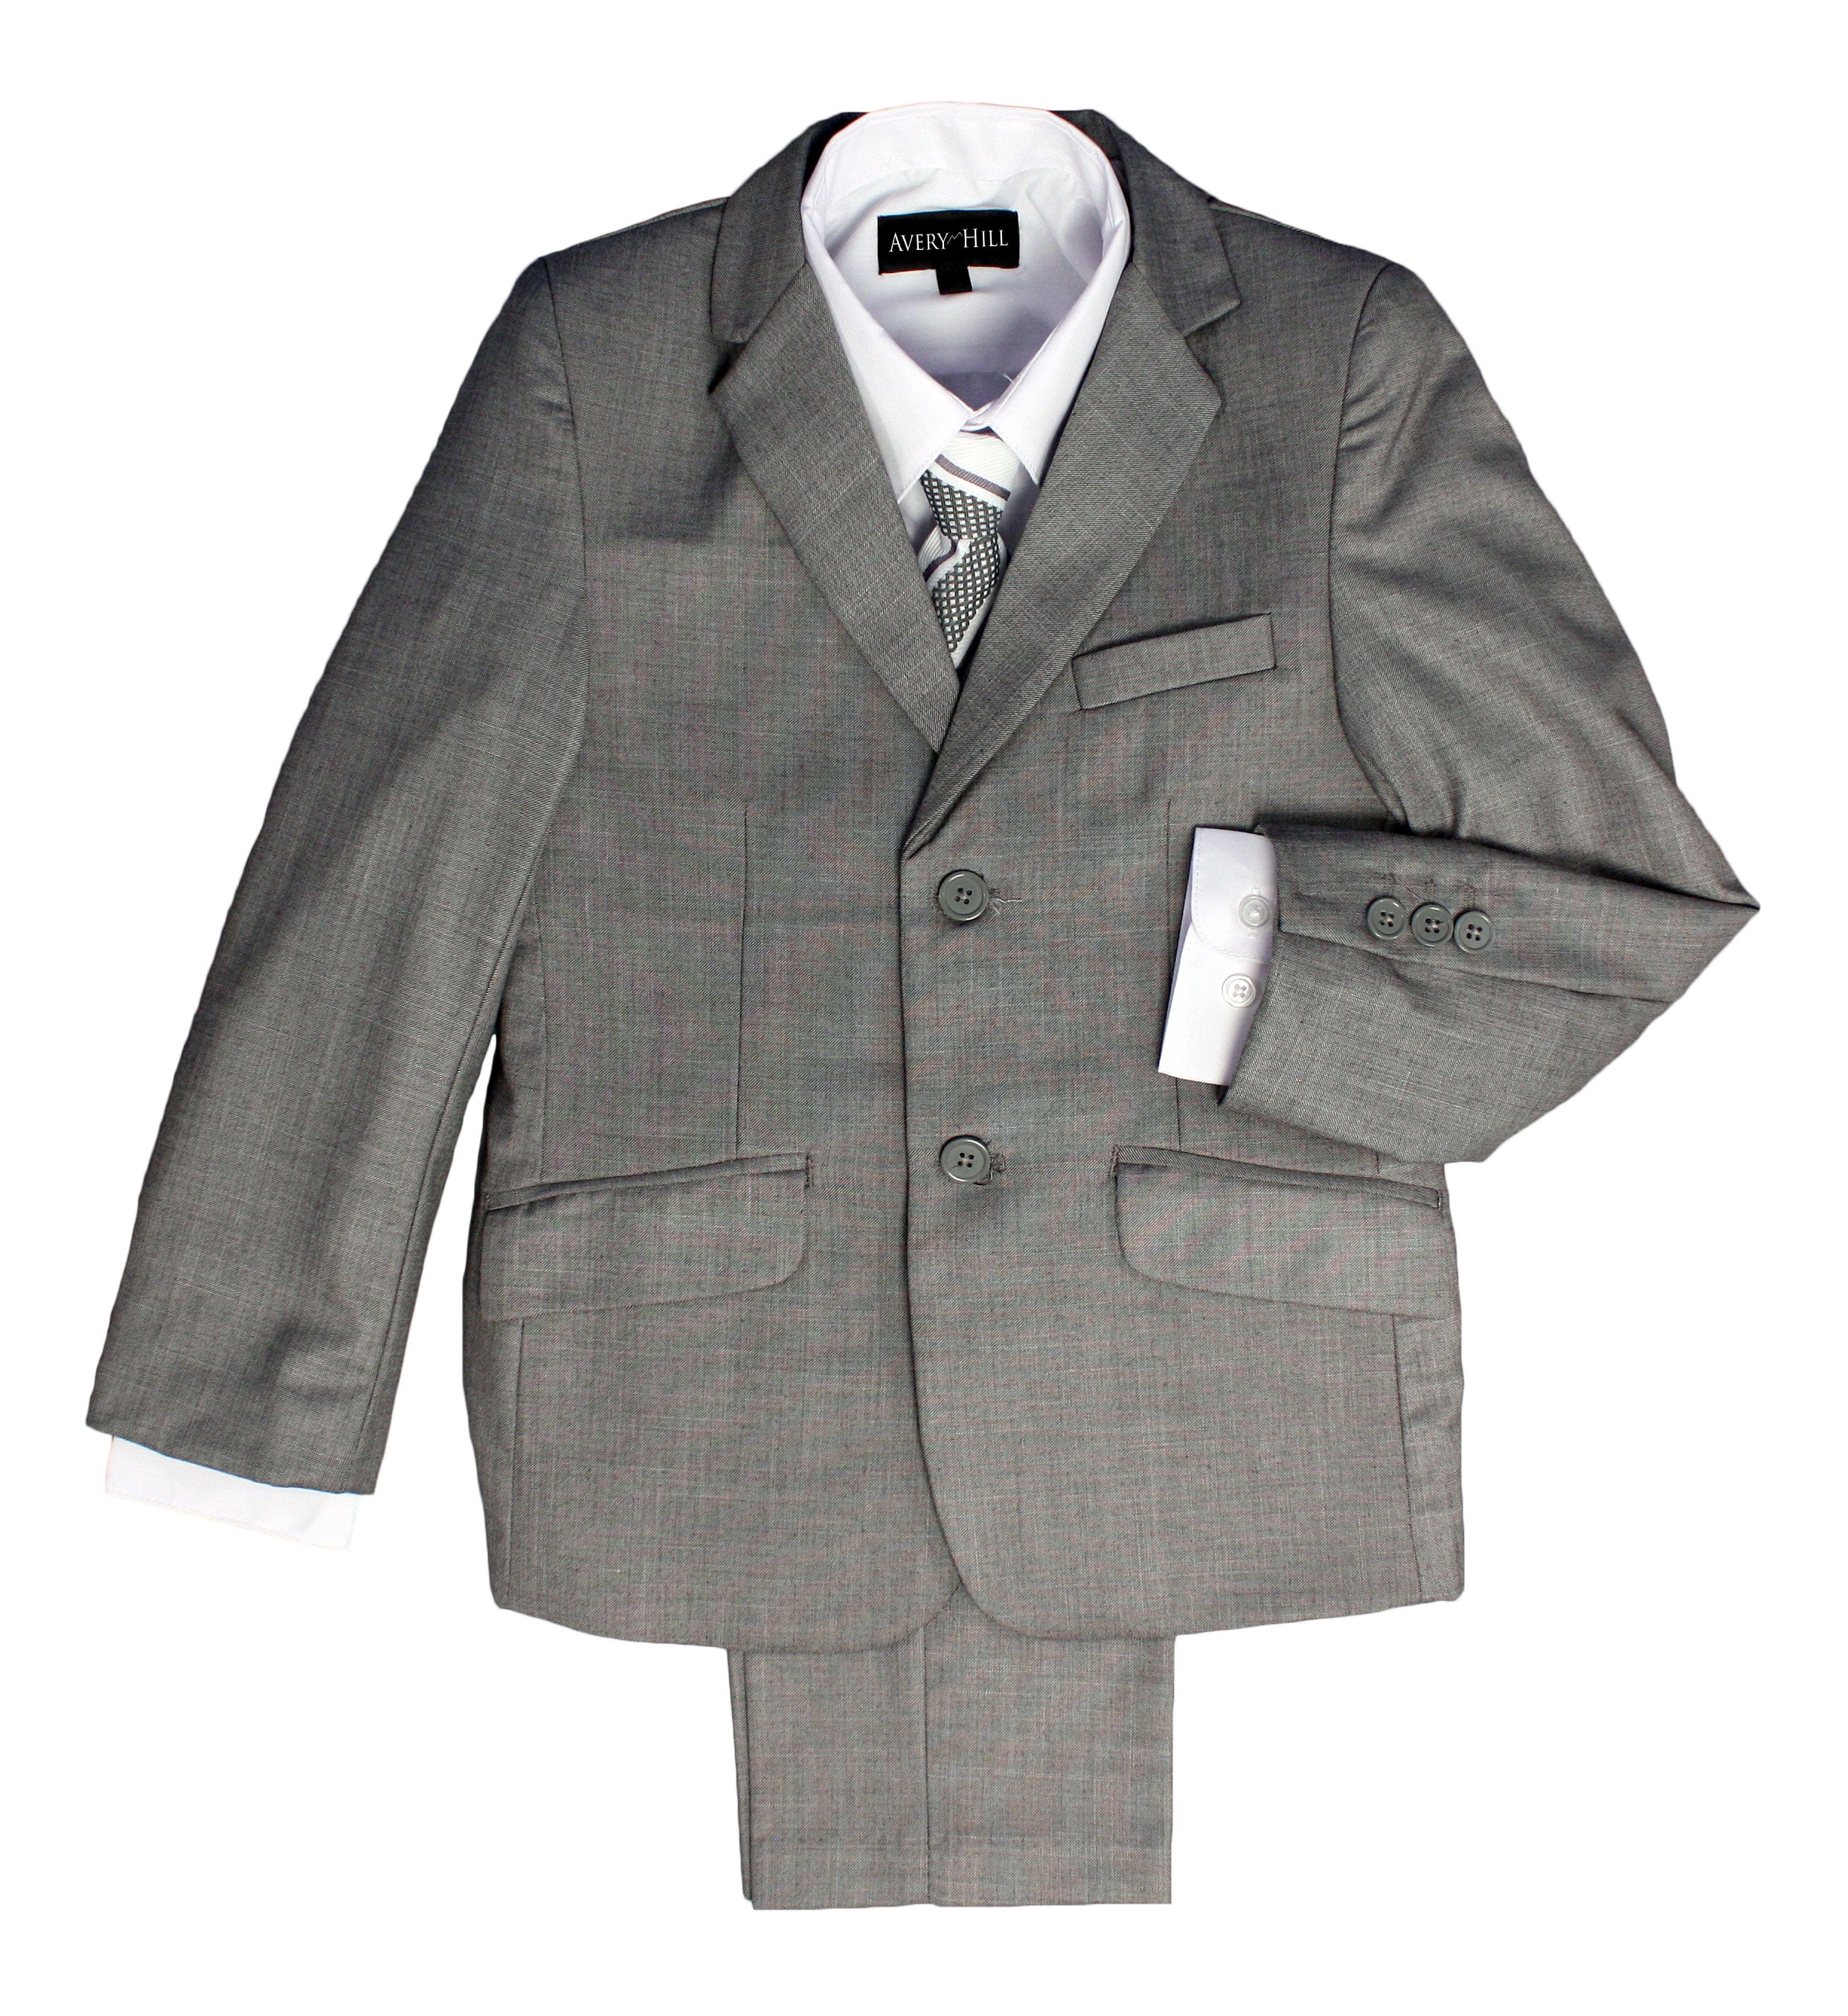 Avery Hill Boys Formal 5 Piece Suit with Shirt and Vest 